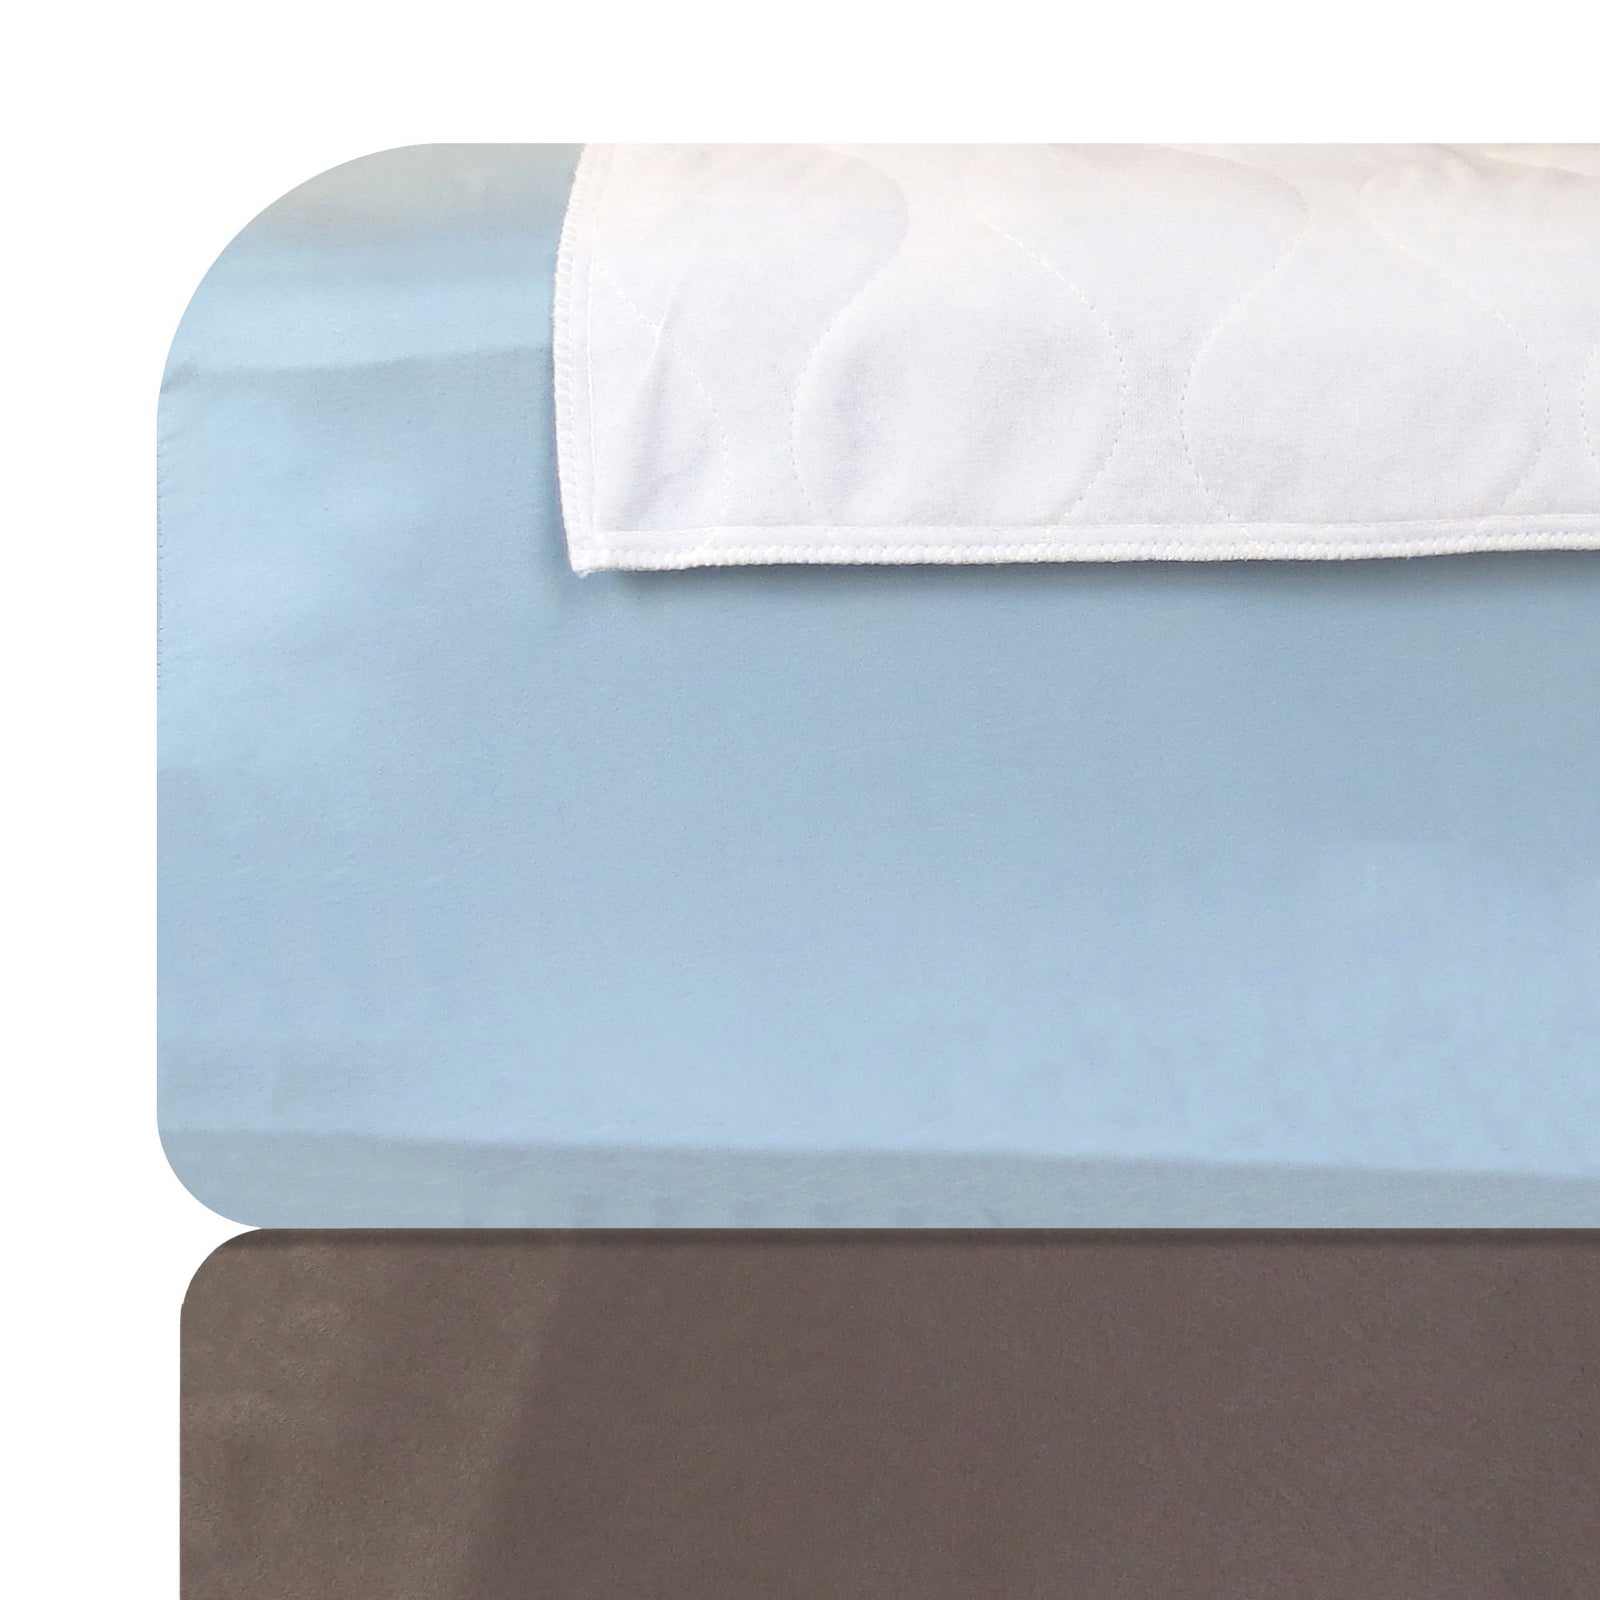 HYGIENX Deluxe Waterproof Sheet Protector 34”x36” 3 Pack 4 Layer